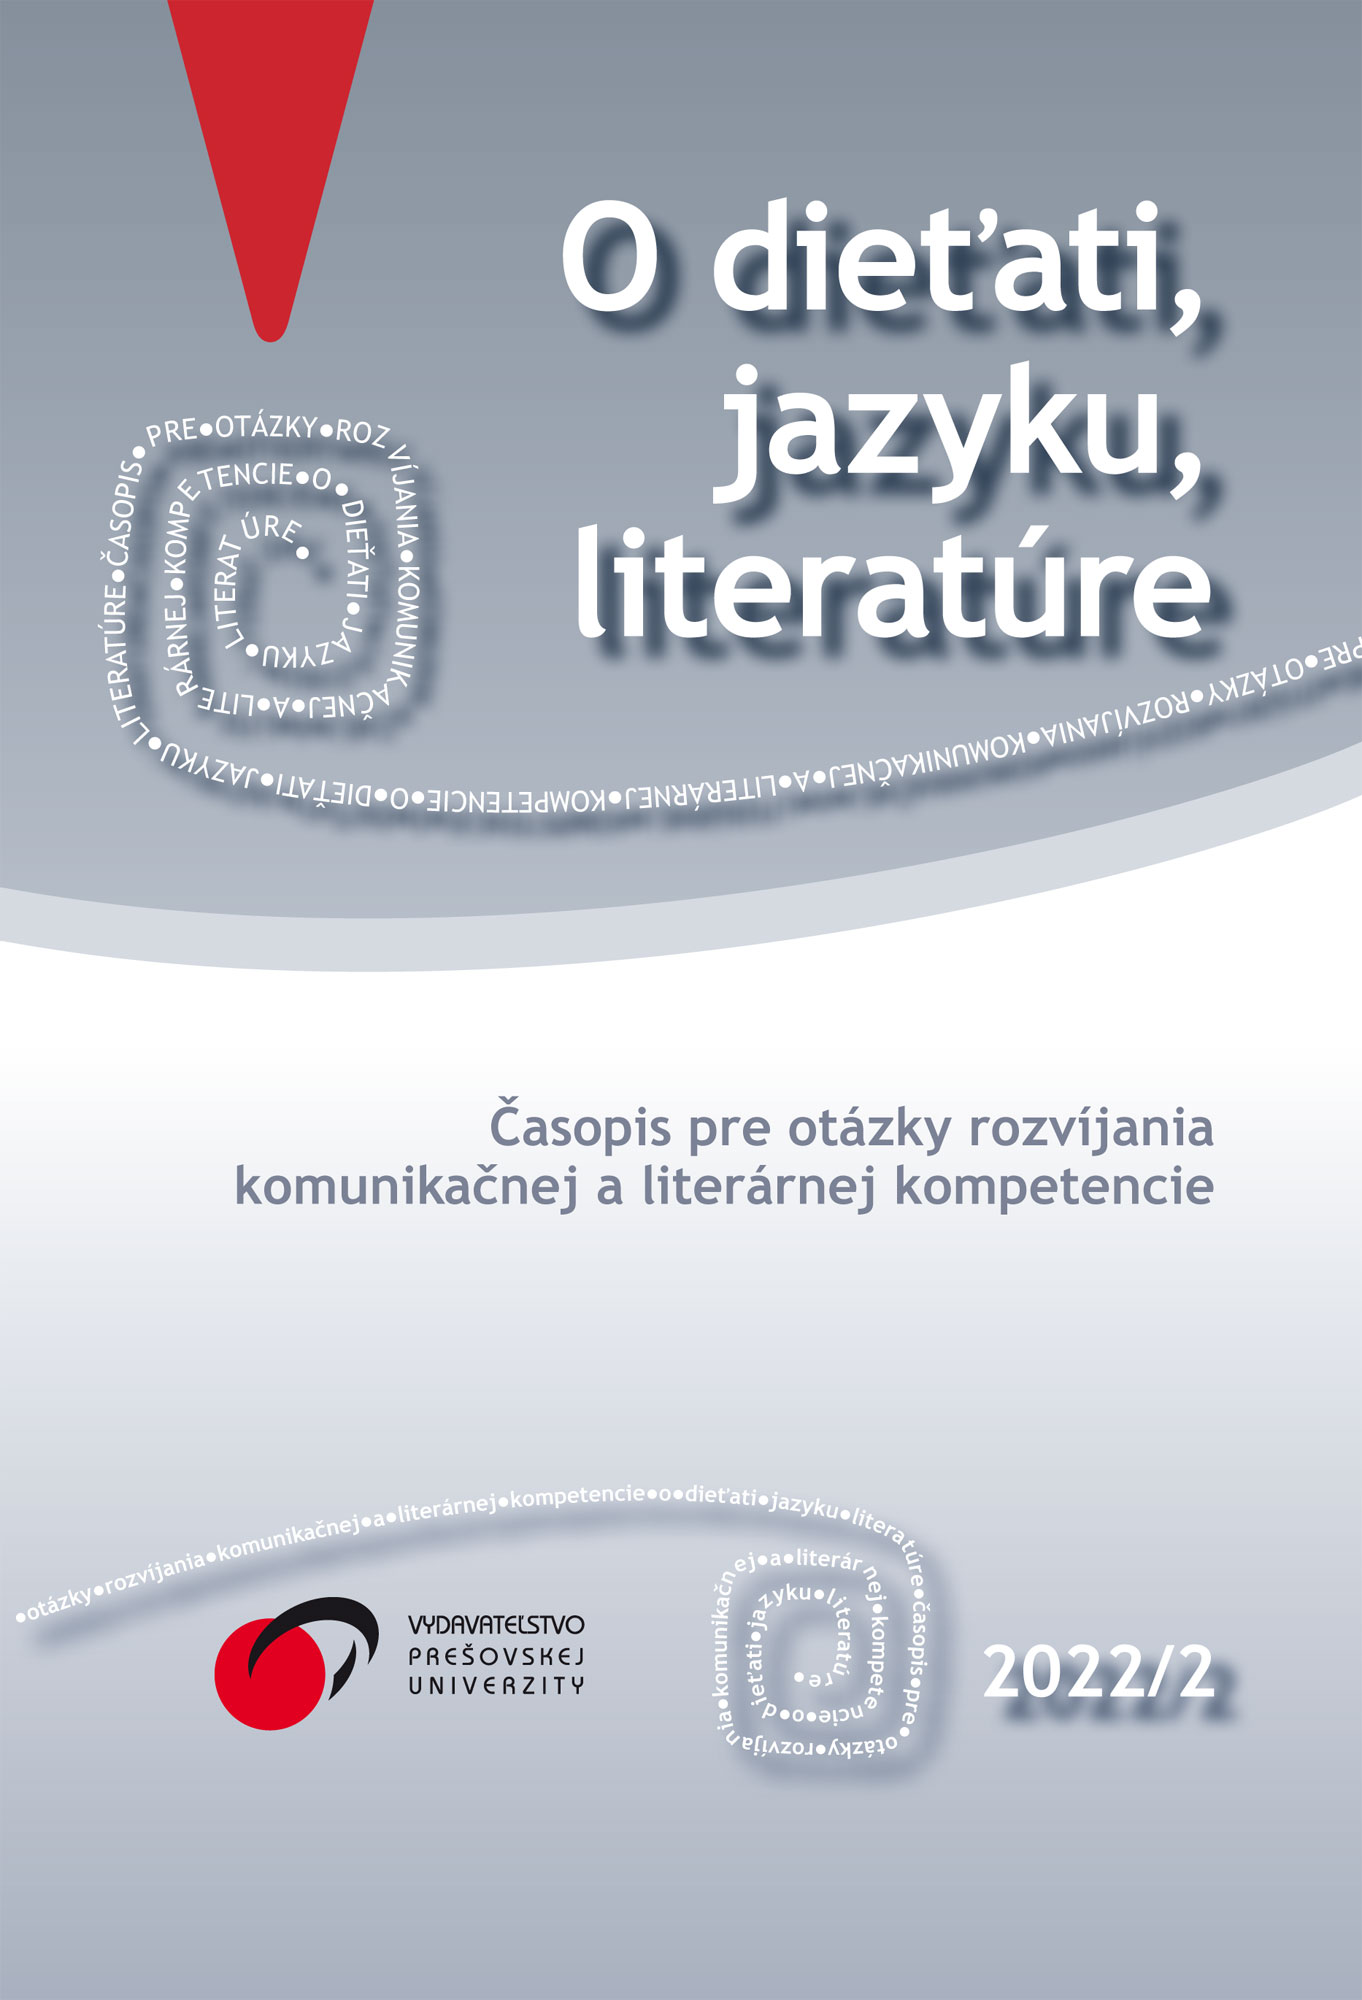 Life values in prose for children and youth by Jiří Stránský,
half a century since their creation Cover Image